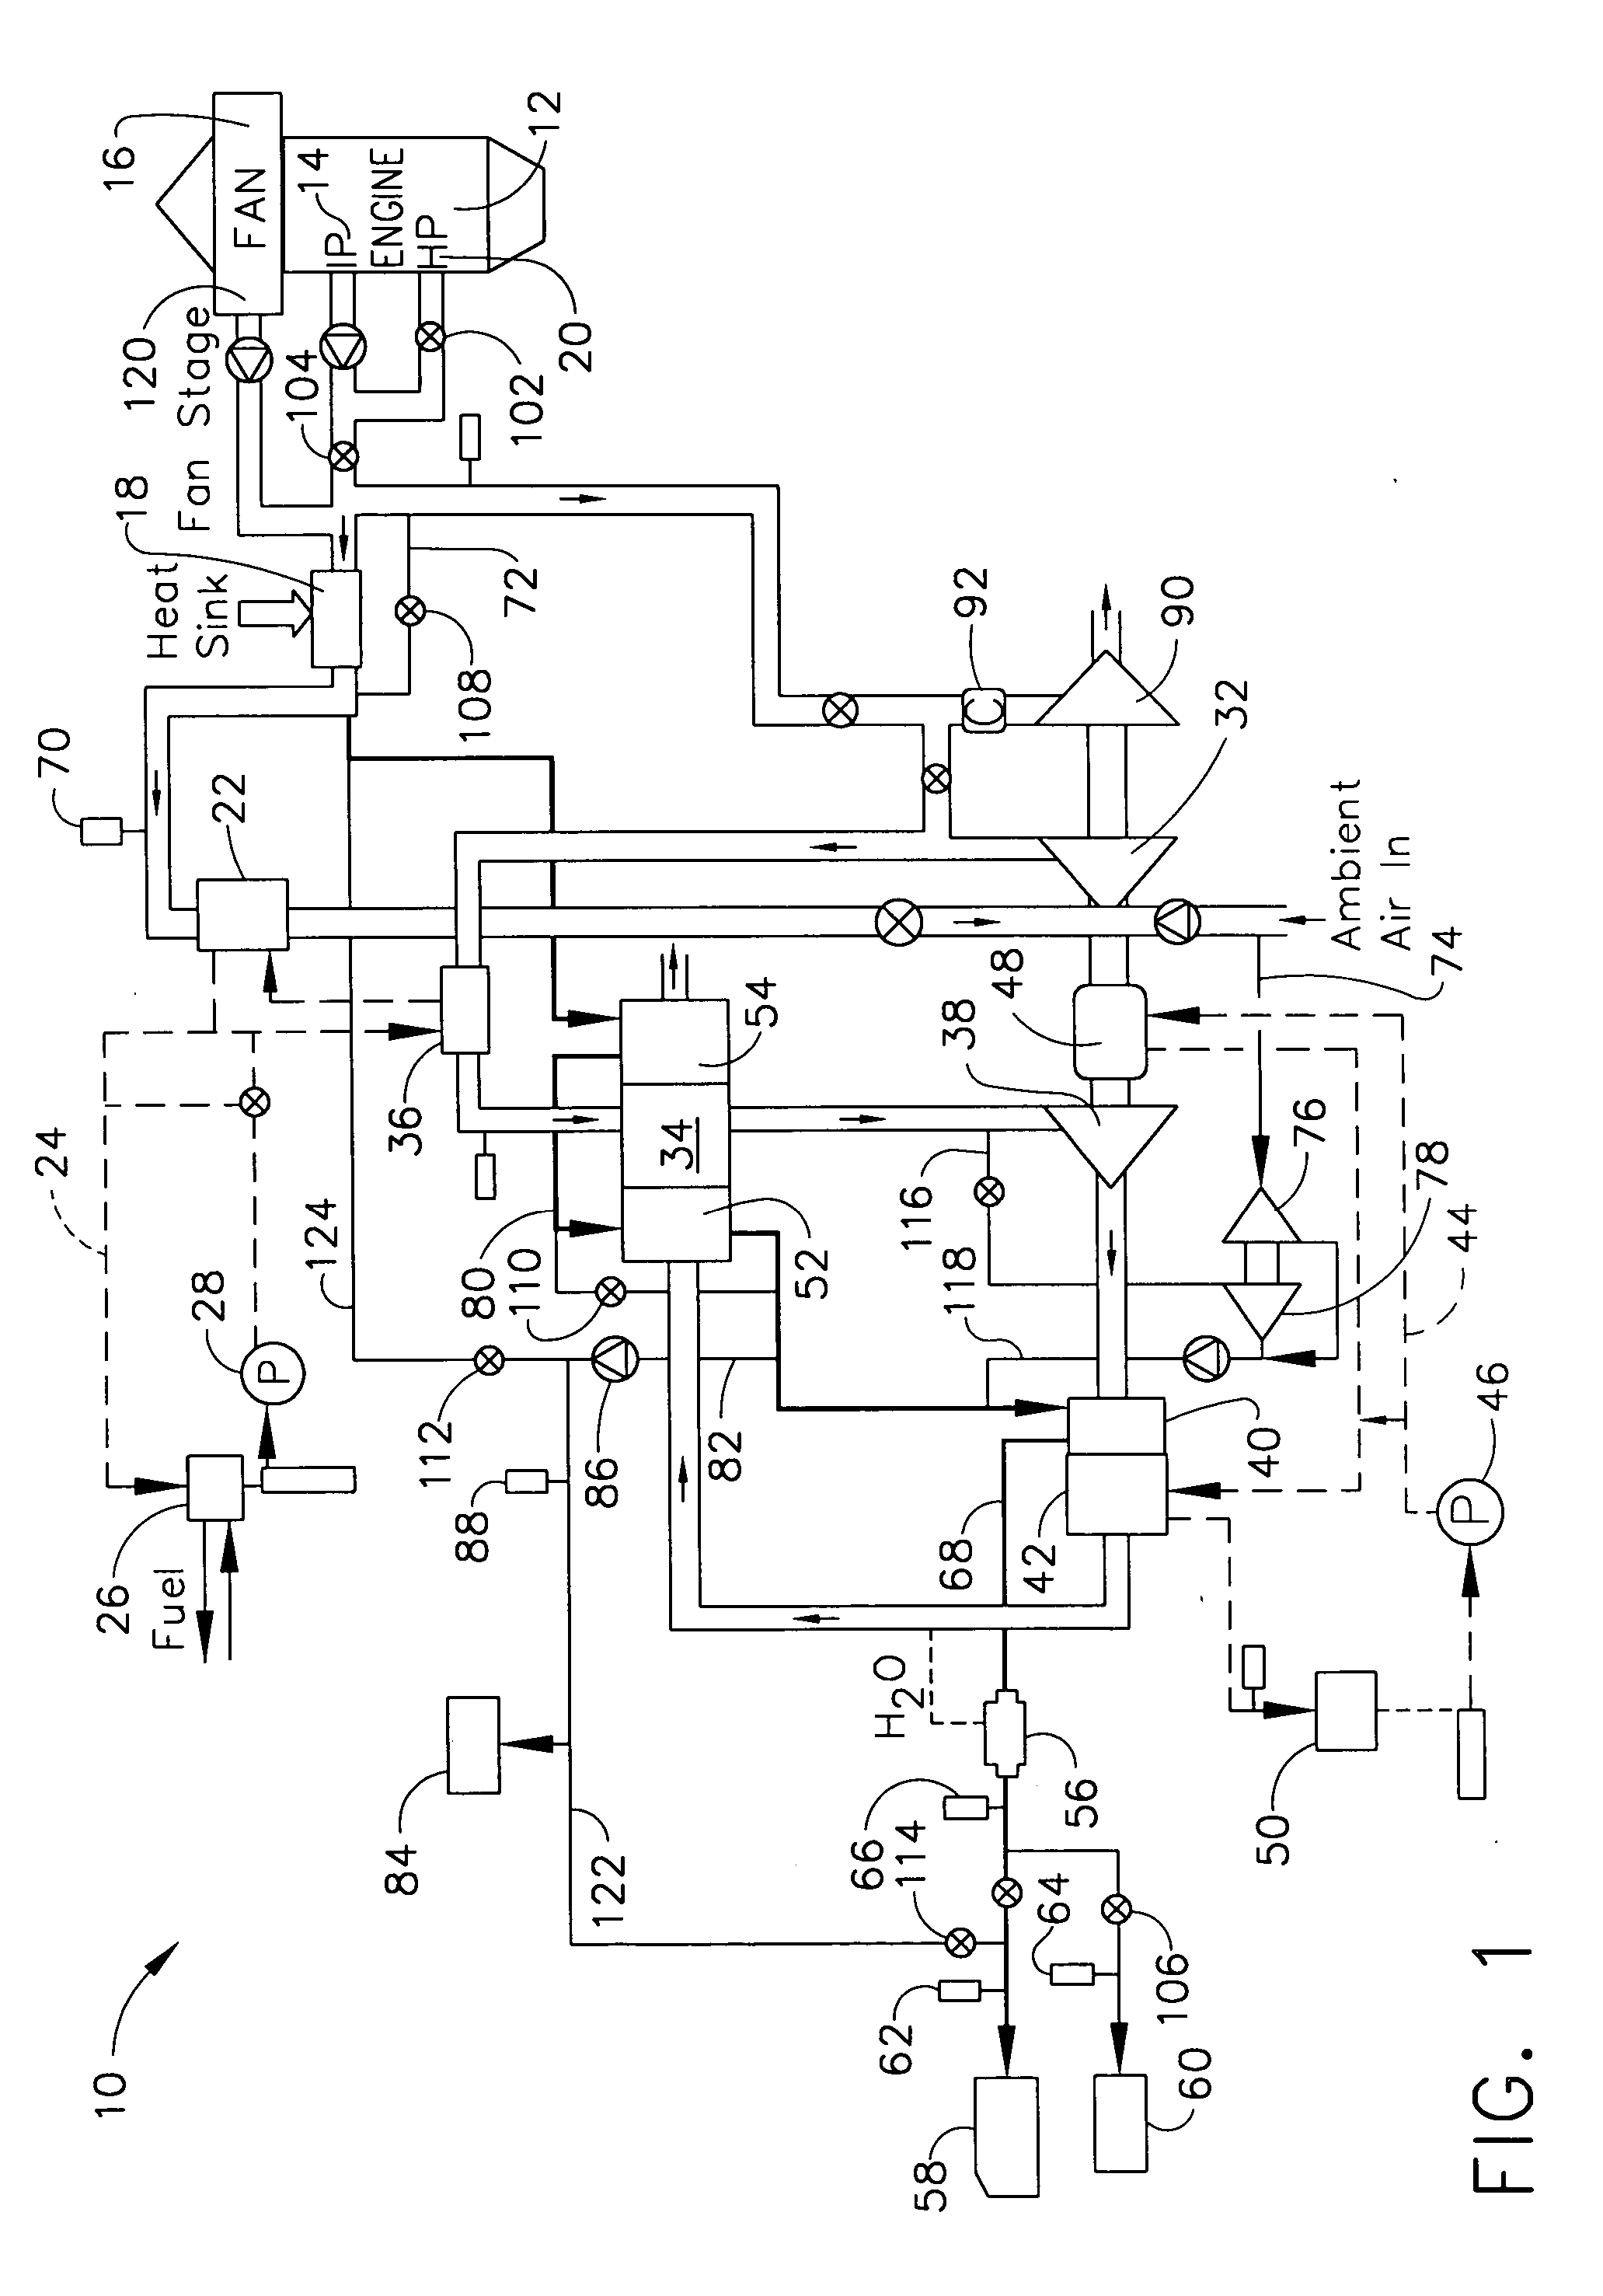 Indirect regenerative air cycle for integrated power and cooling machines